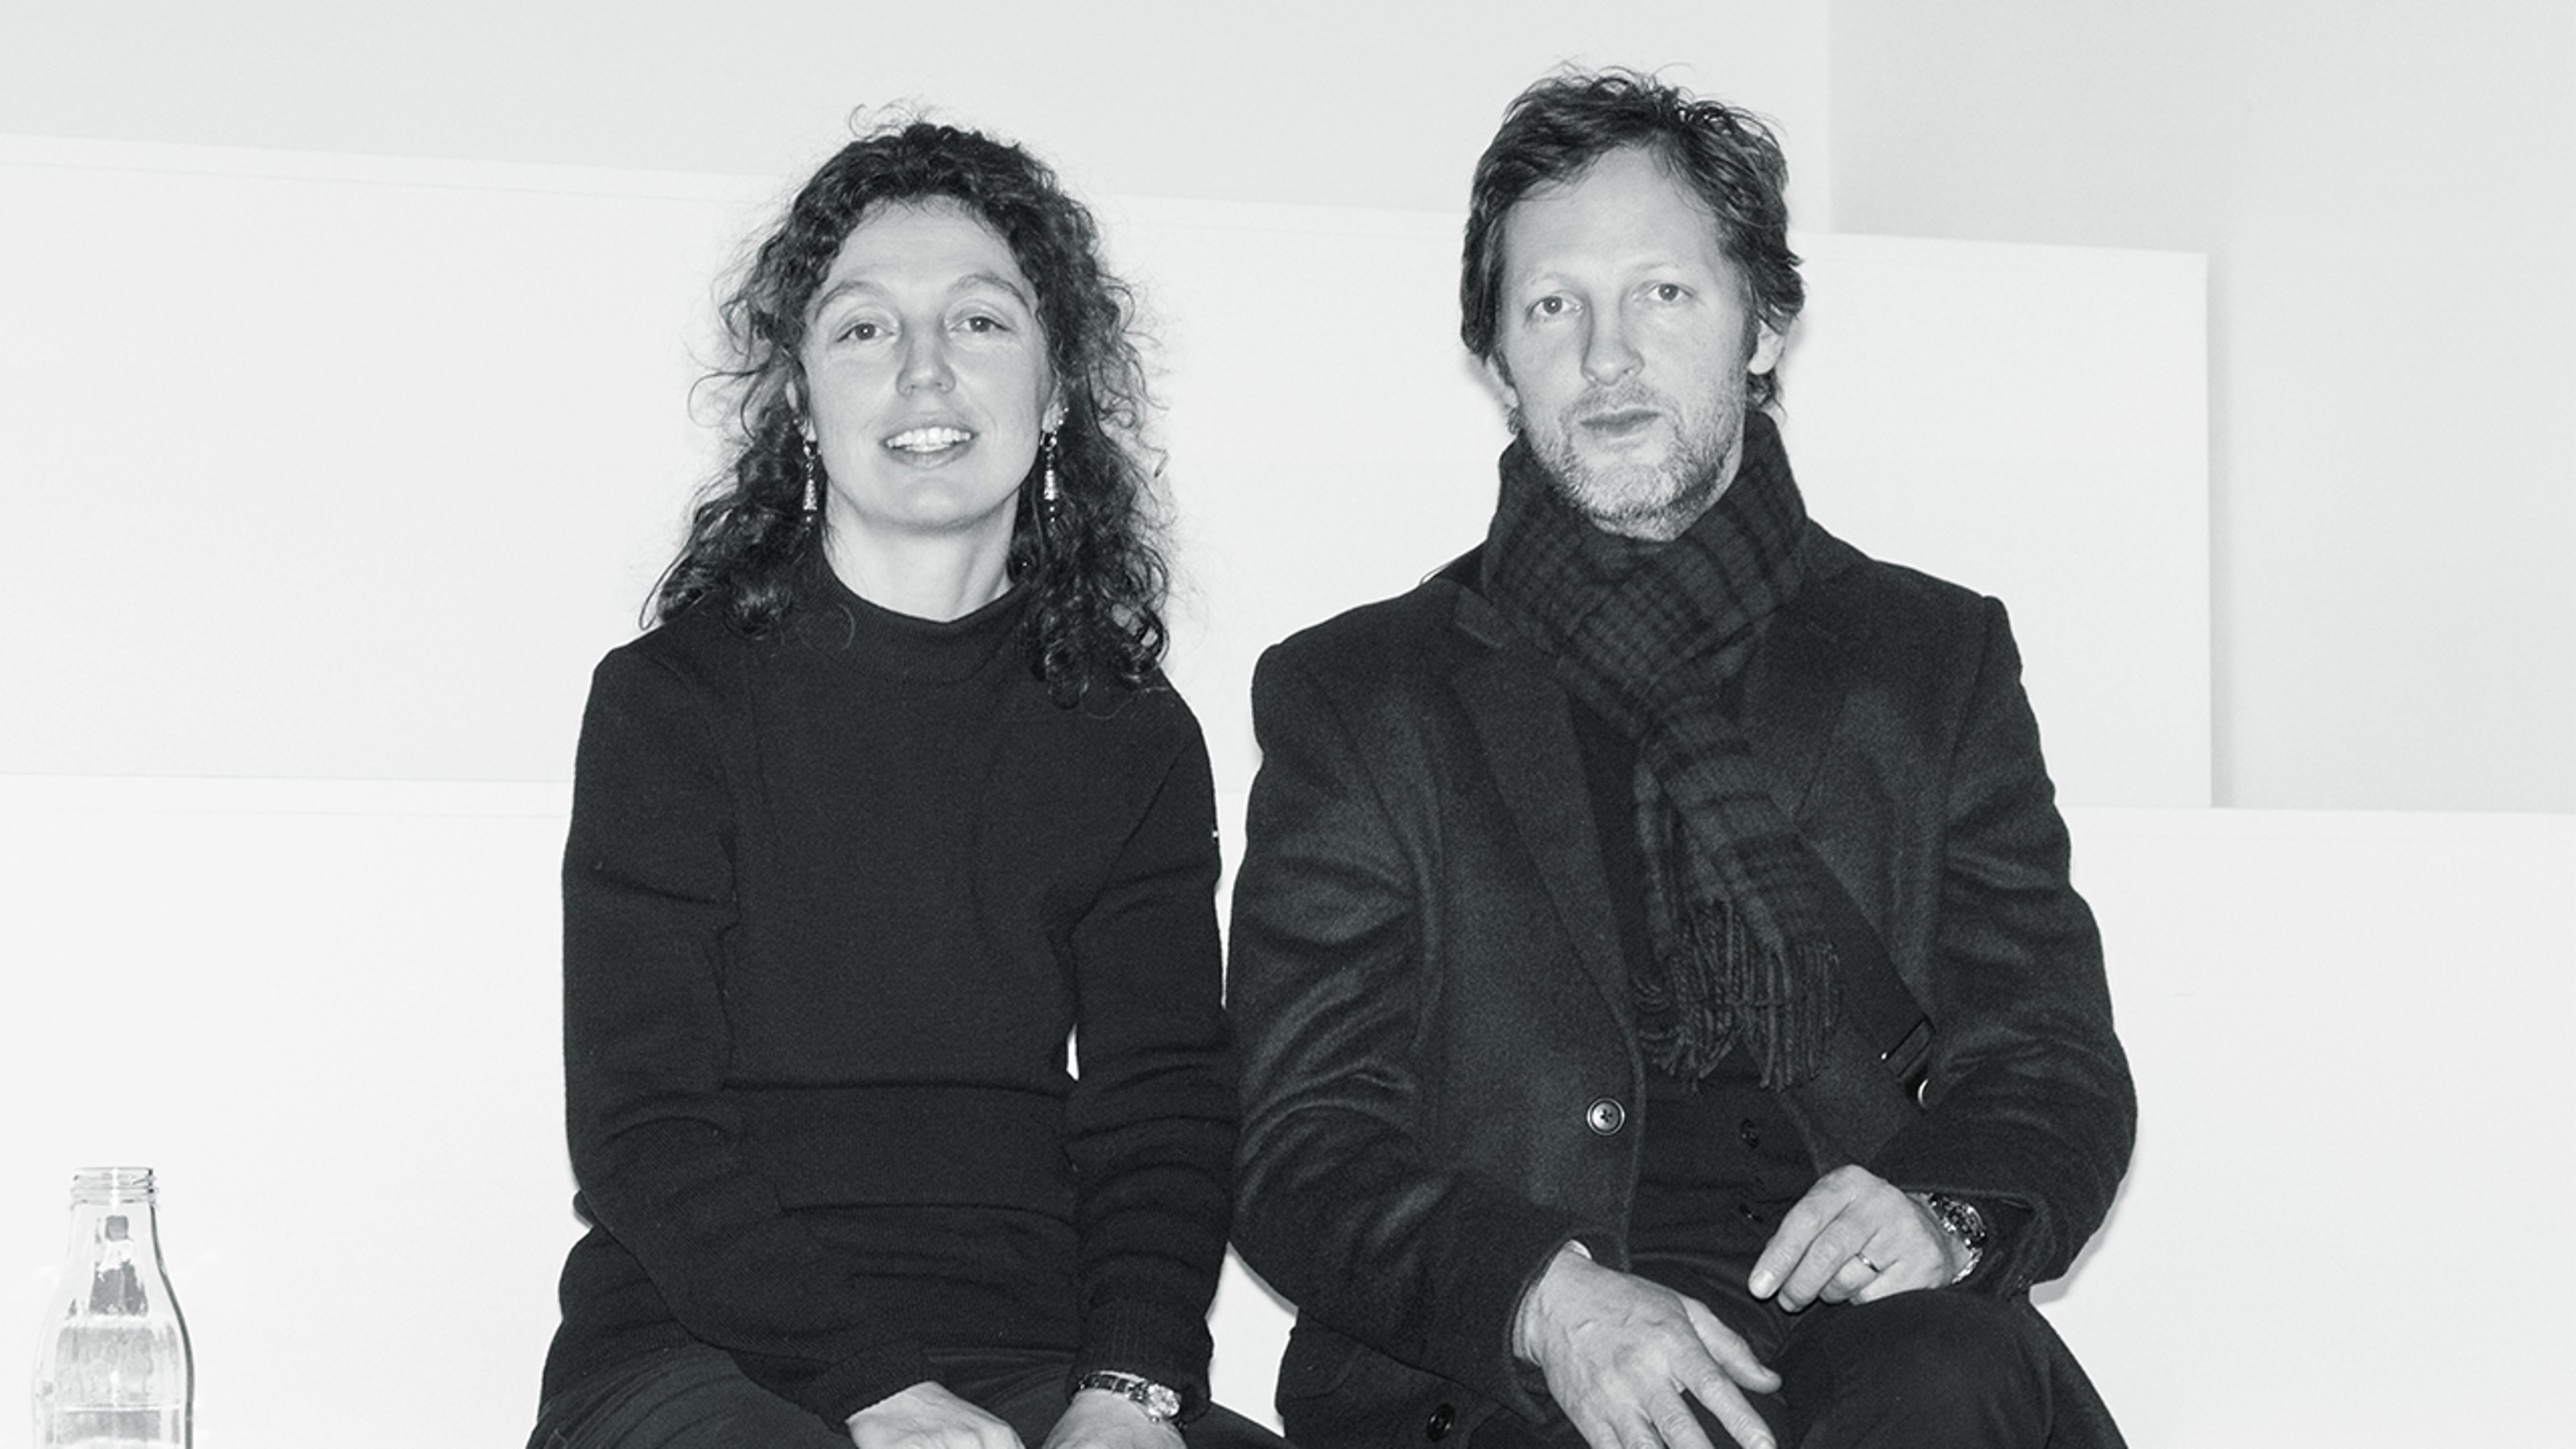 James Thornhill and Fulvia Carnevale, who make up the artist duo of Claire Fontaine, sitting